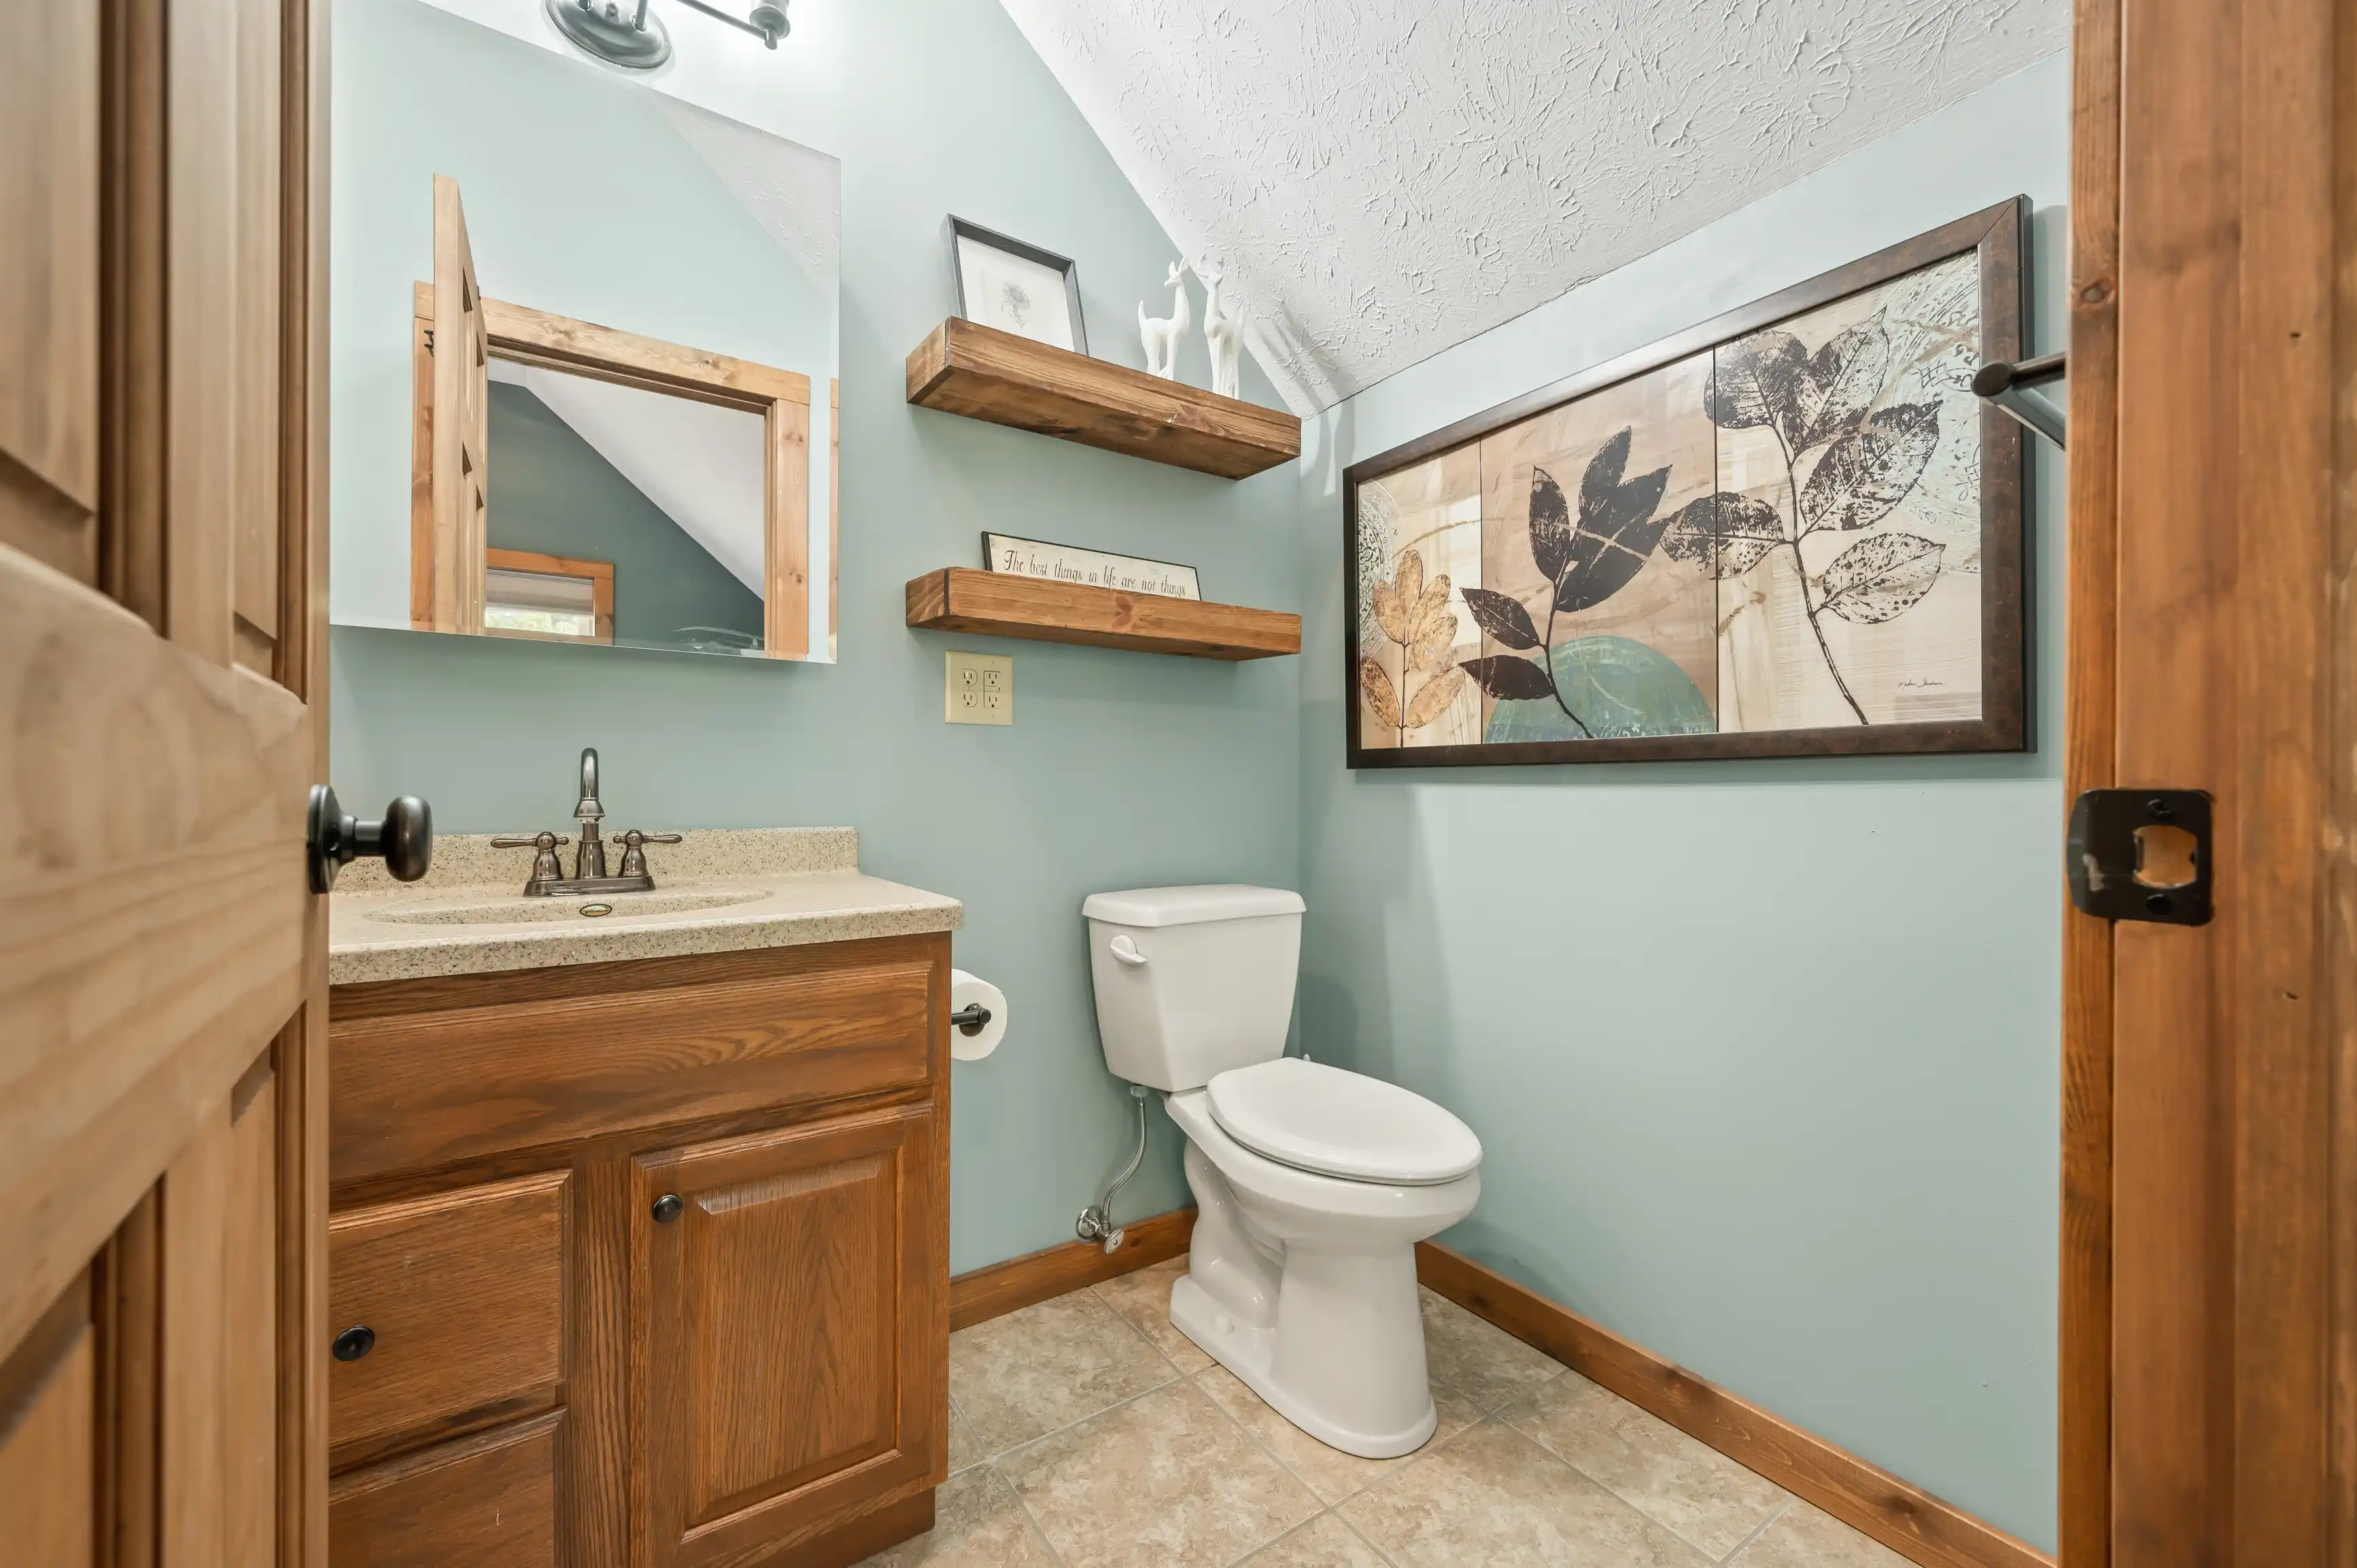 A cozy bathroom interior with teal walls, featuring a wooden vanity with a granite countertop and a mirror above, a toilet, decorative floating shelves, and a framed botanical print.